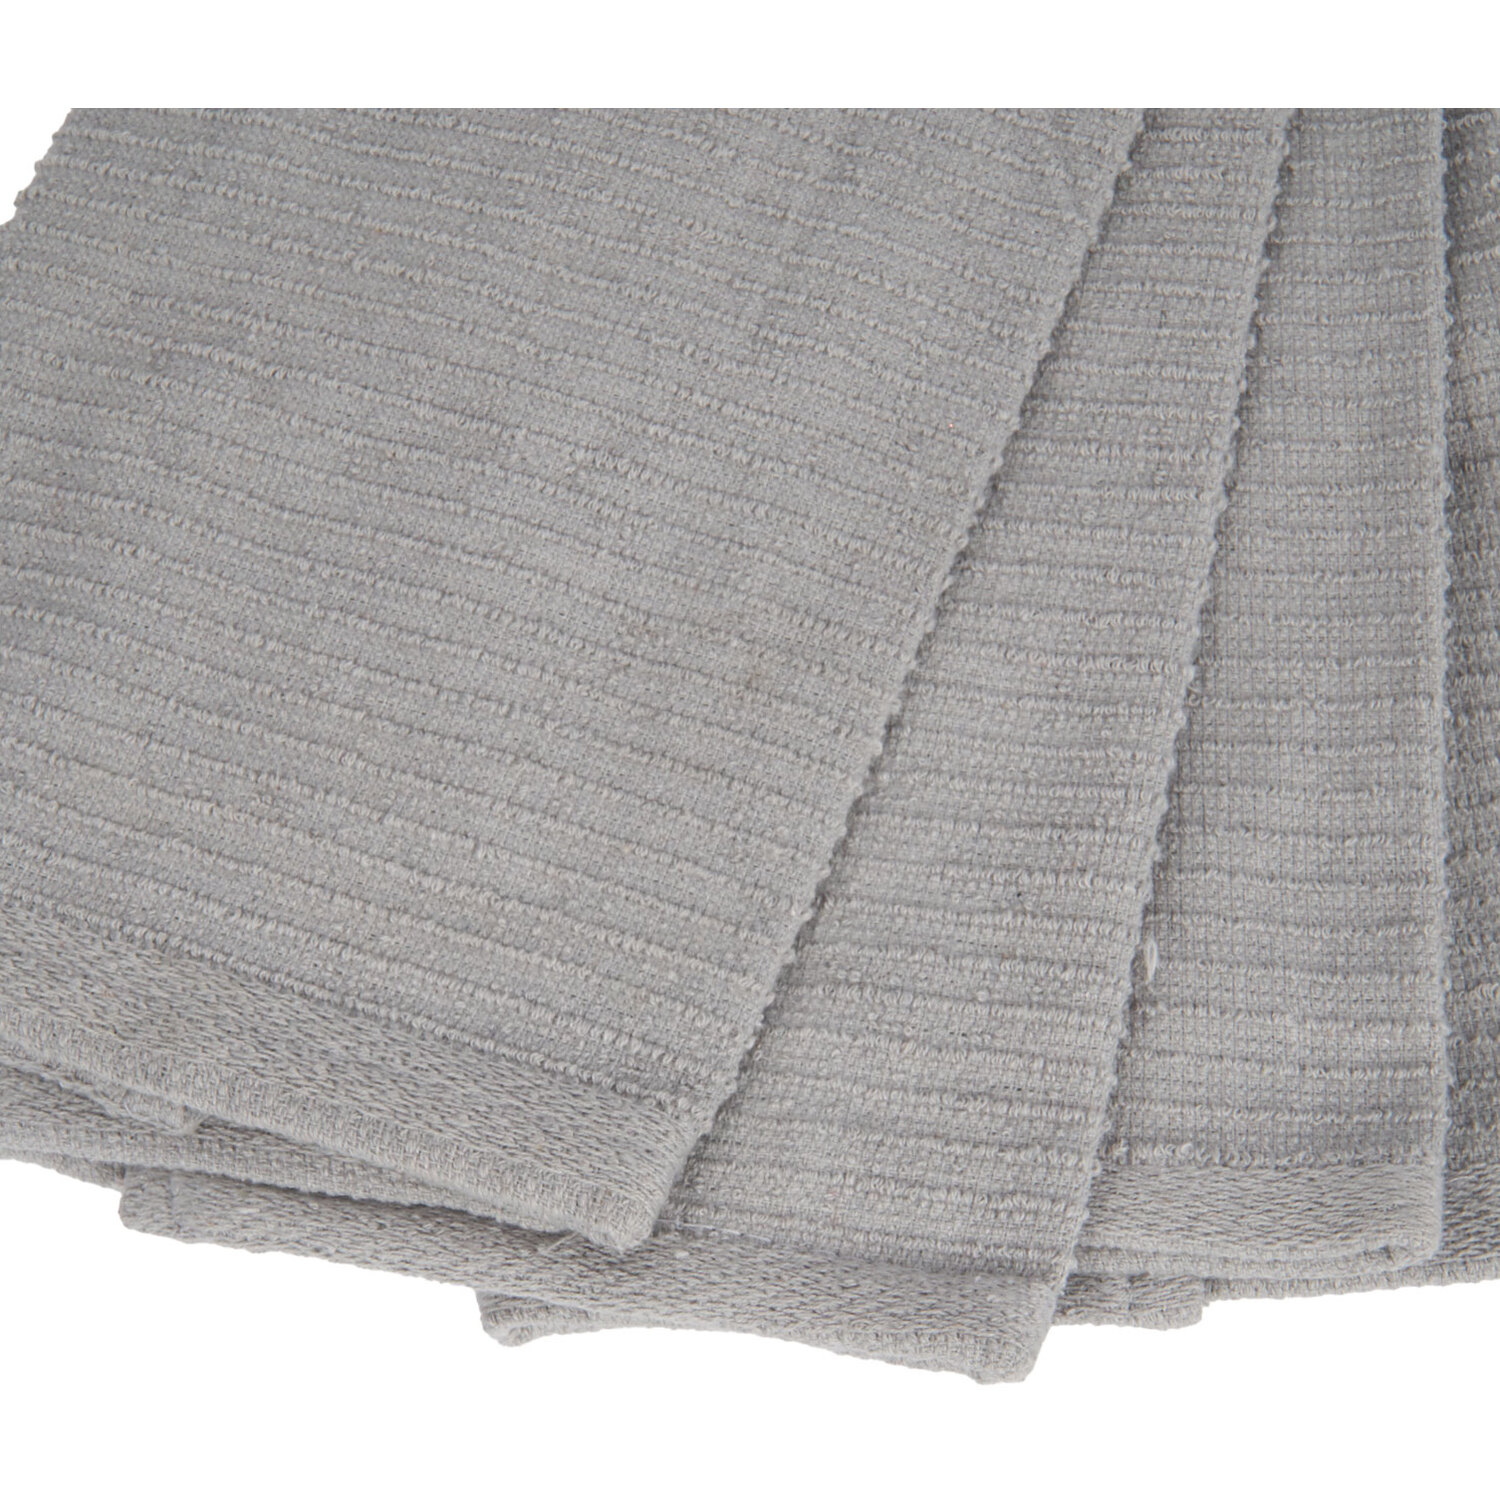 Pack of 2 Essentials Ribbed Terry Tea Towels - Grey Image 3